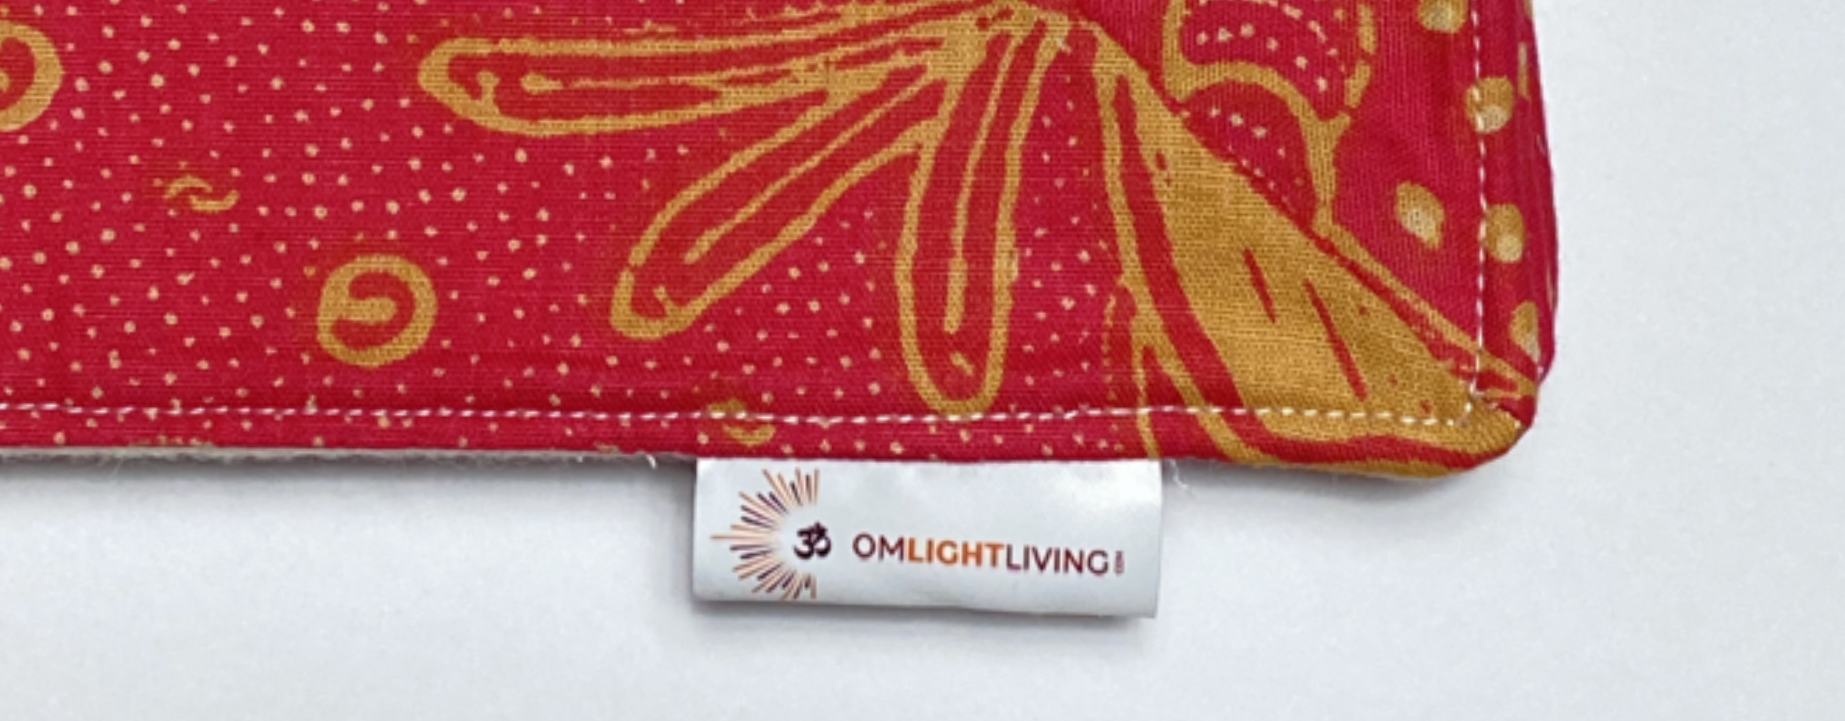 OmLightLiving products